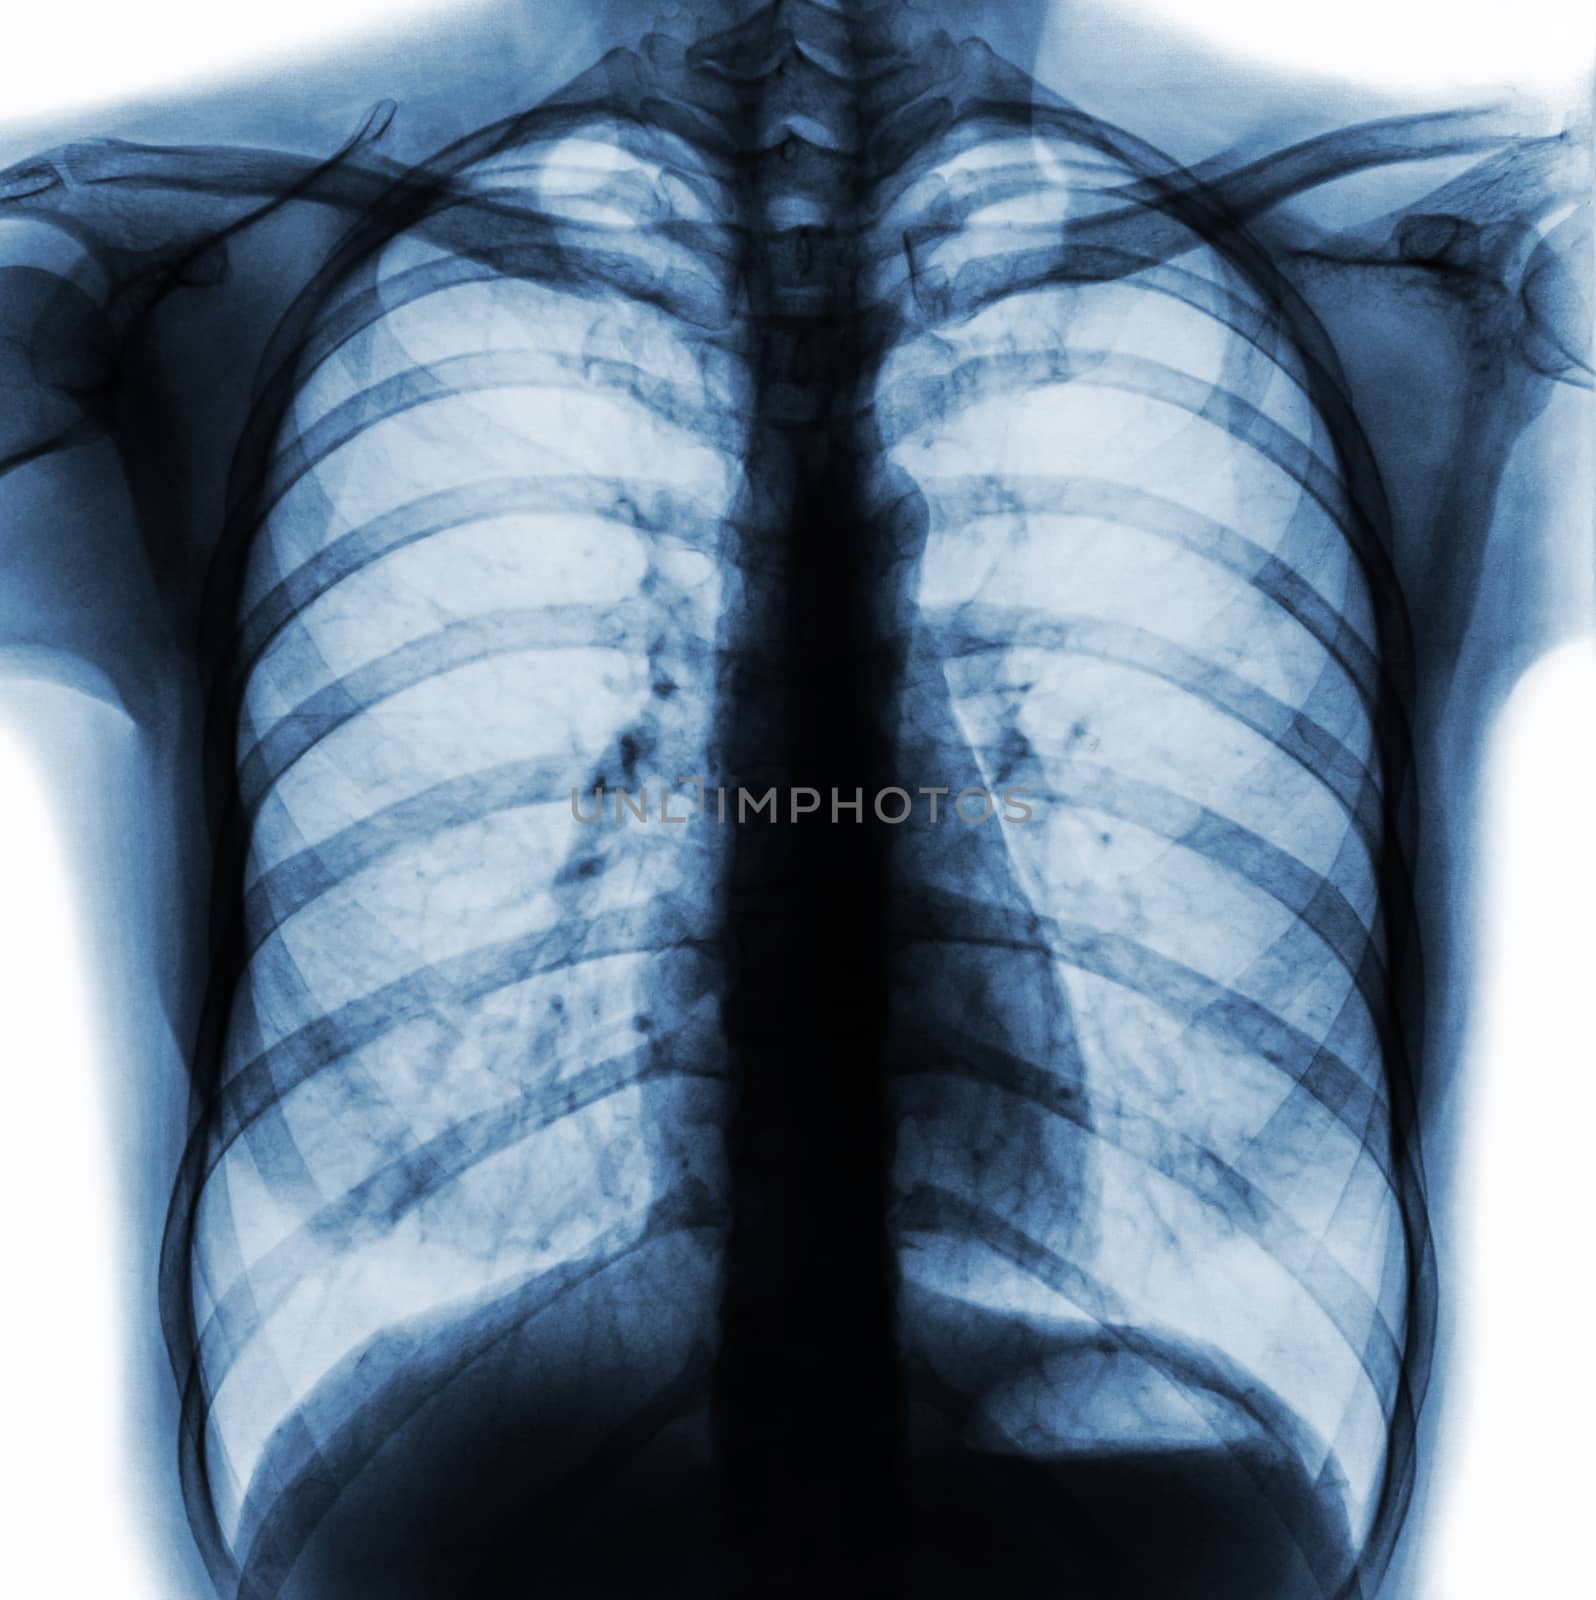 Film chest x-ray PA upright show normal human chest . by stockdevil